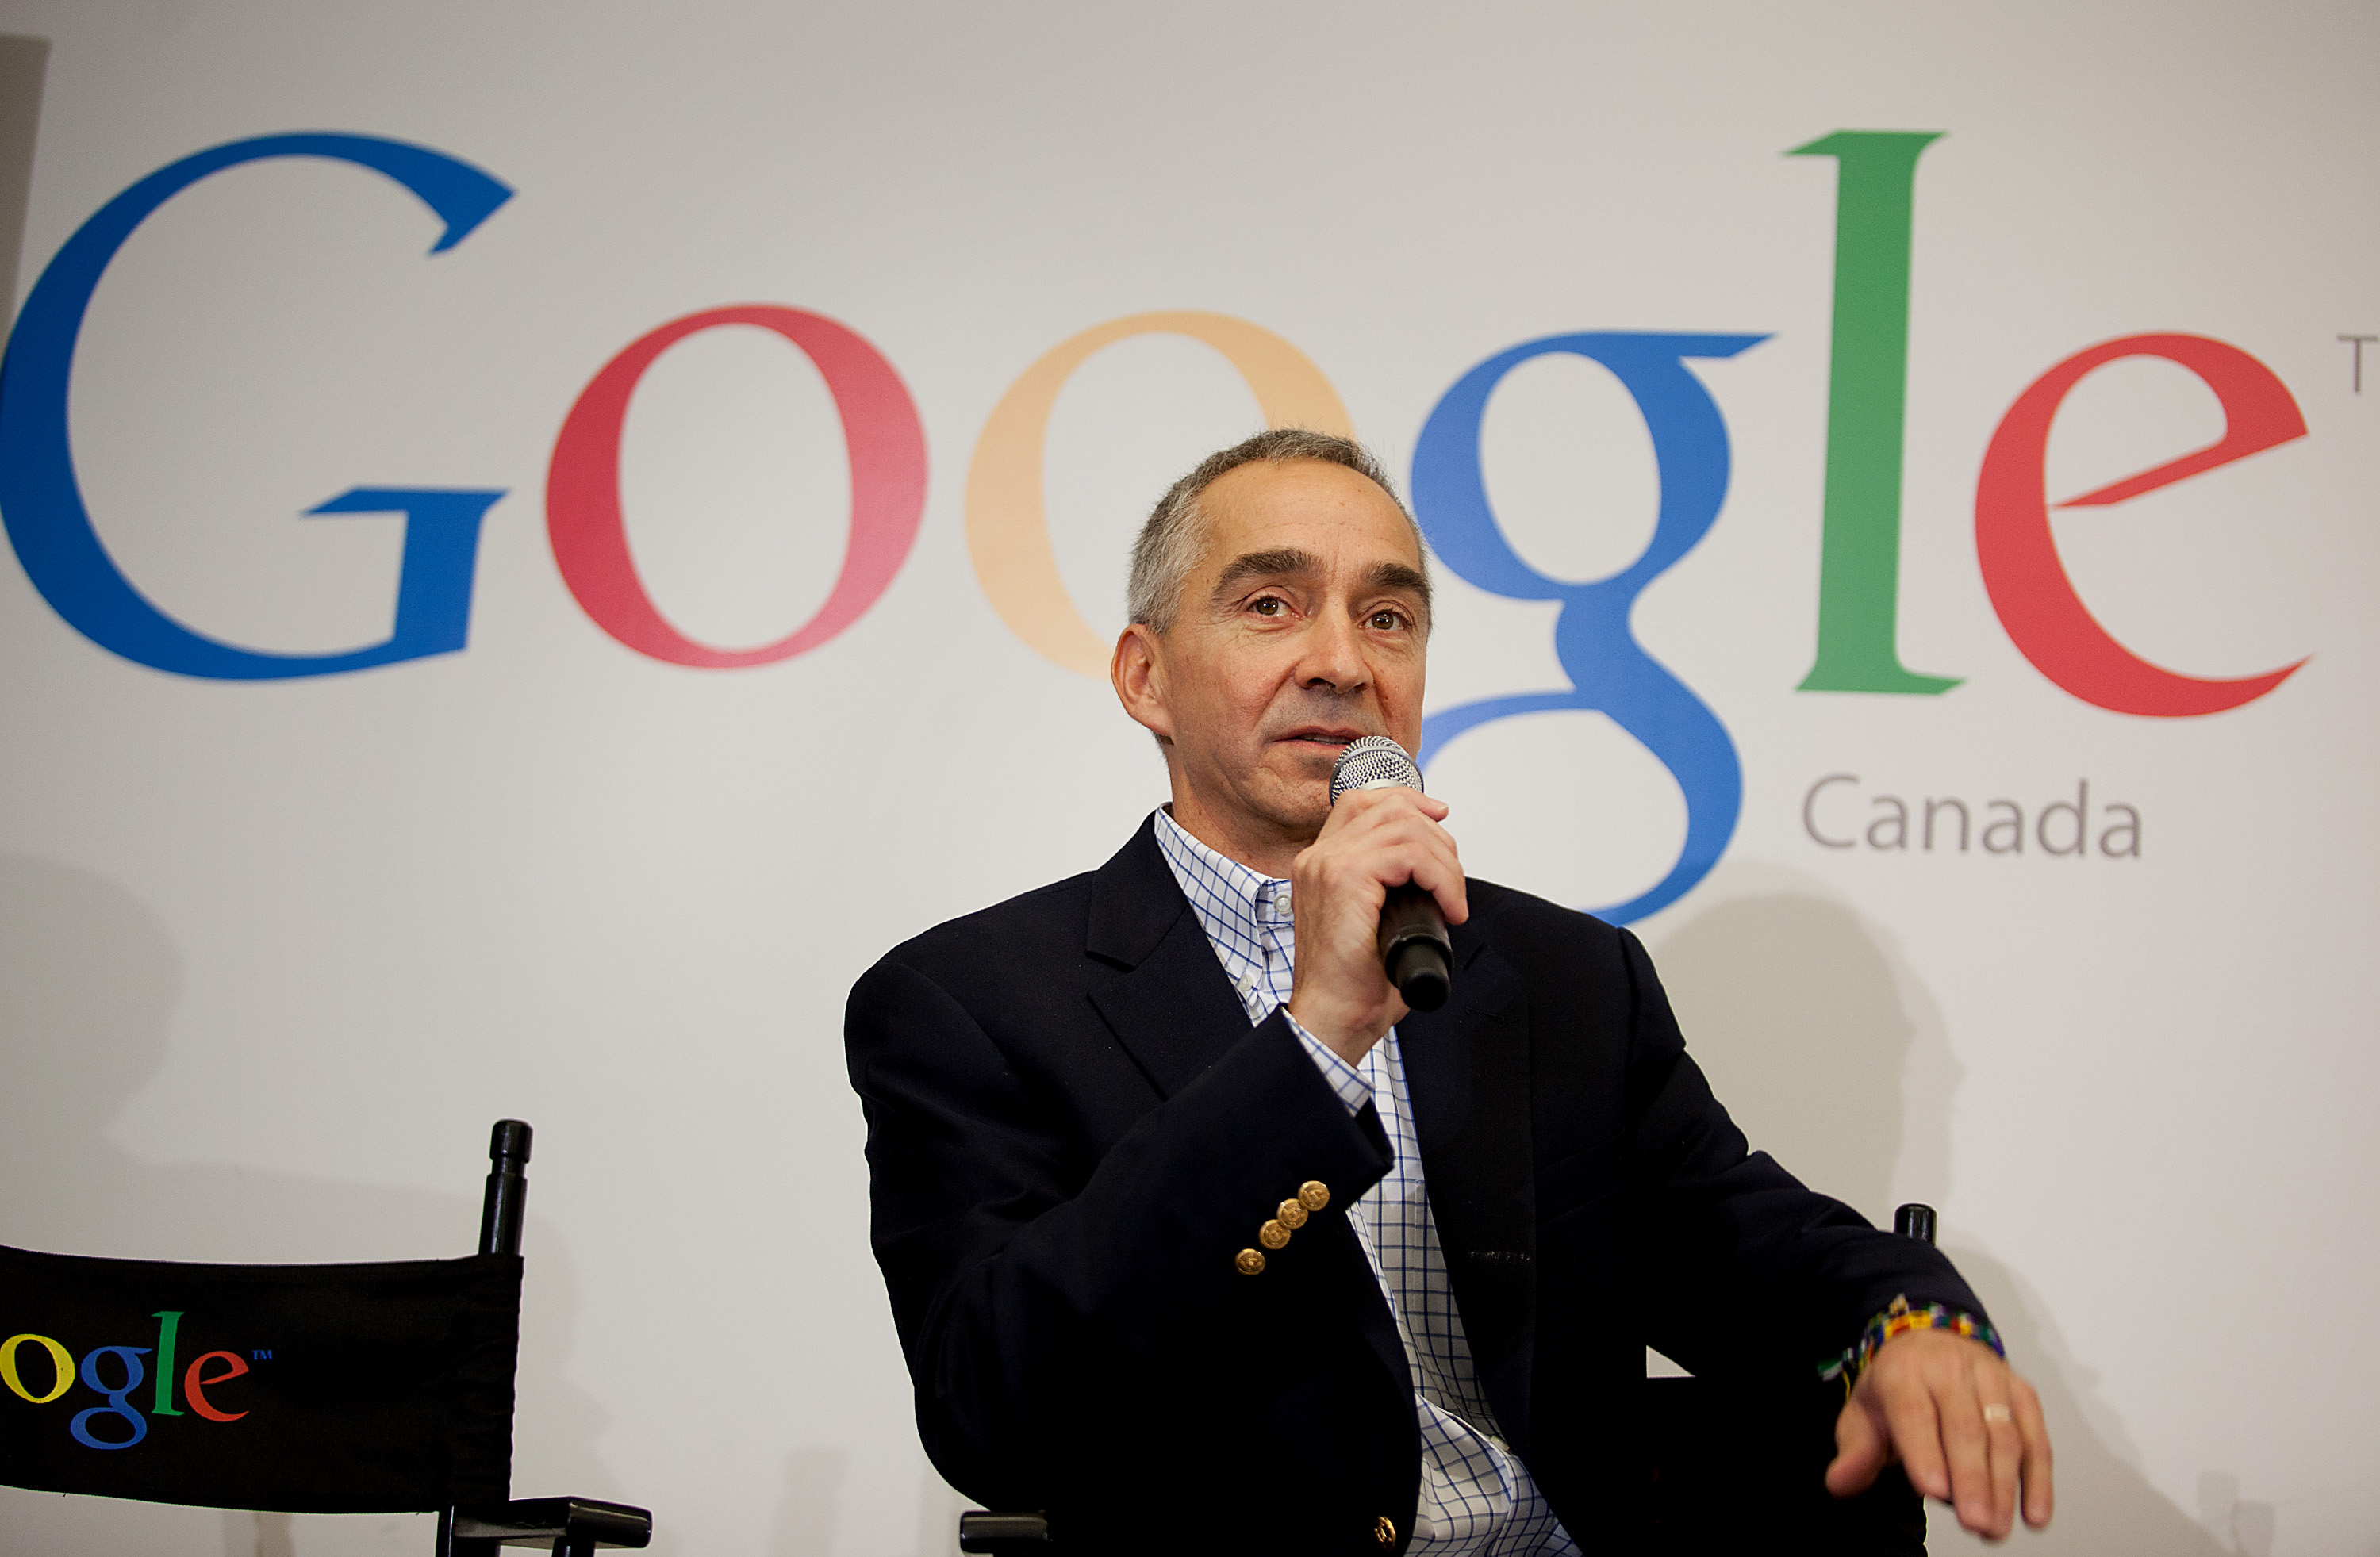 Patrick Pichette, Chief Financial Officer of Google Inc., speaks to the press during a media tour for the grand opening of Google Inc.'s new office in Toronto on Nov. 13, 2012. (Bloomberg/Getty Images)